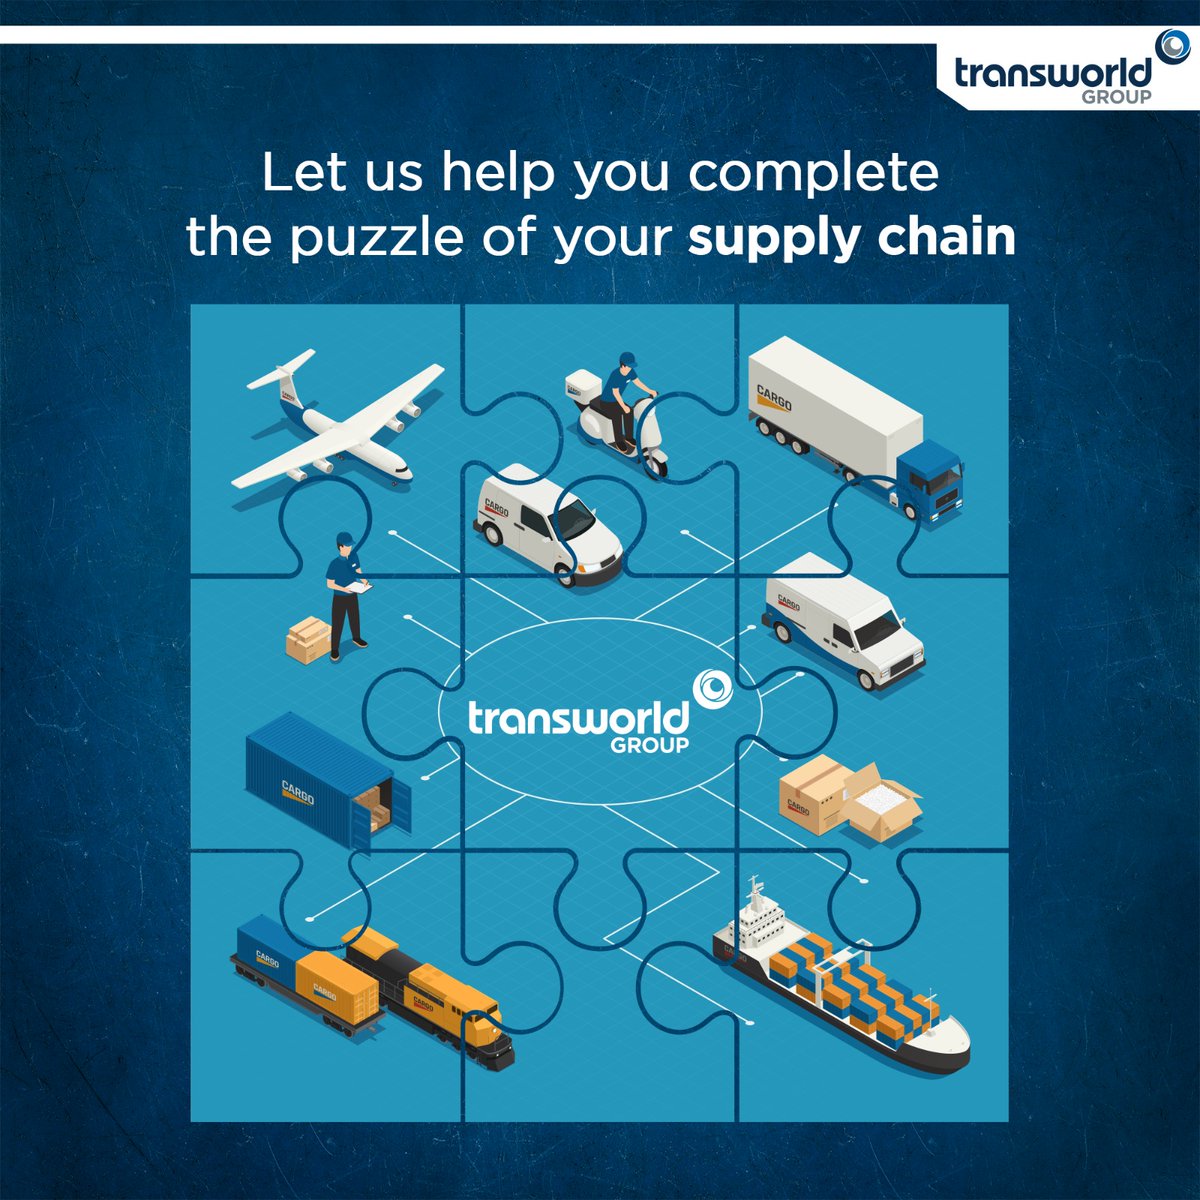 Building a successful supply chain can feel like putting together a puzzle. That's where #TransworldGroup comes in. With our comprehensive logistics solutions, we'll create a tailored plan that ensures your cargo moves smoothly and efficiently.

Know More: transworld.com…